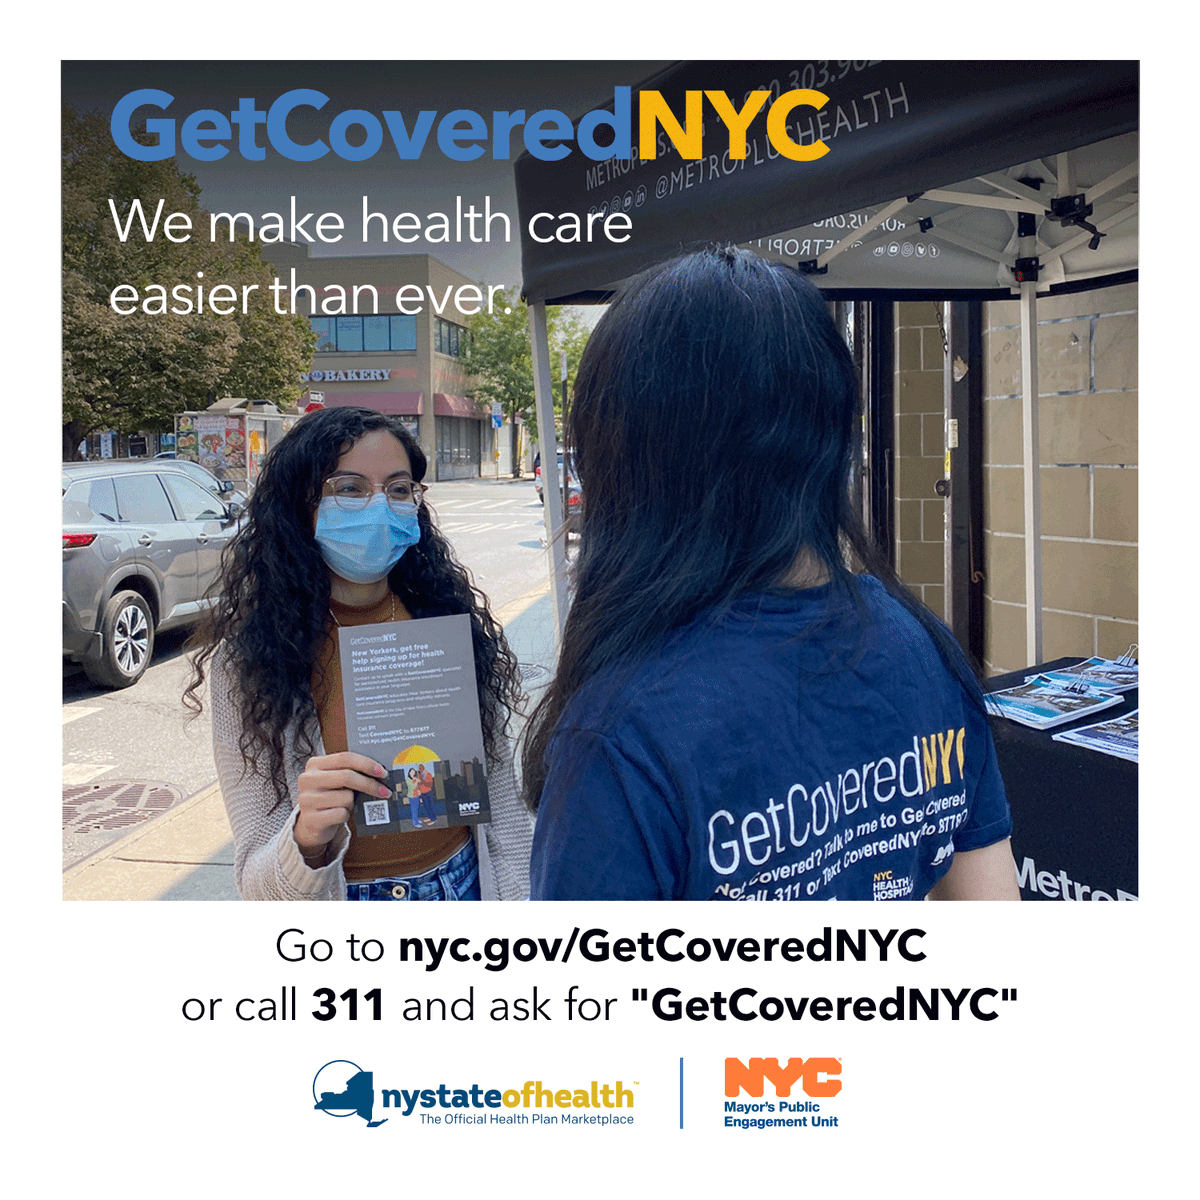 Need to enroll in qualified, affordable health insurance? #GetCoveredNYC is here to help!
Text CoveredNYC to 55676
Call 311 or visit nyc.gov/GetCoveredNYC

@nychealthy @nychealthsystem @nychra